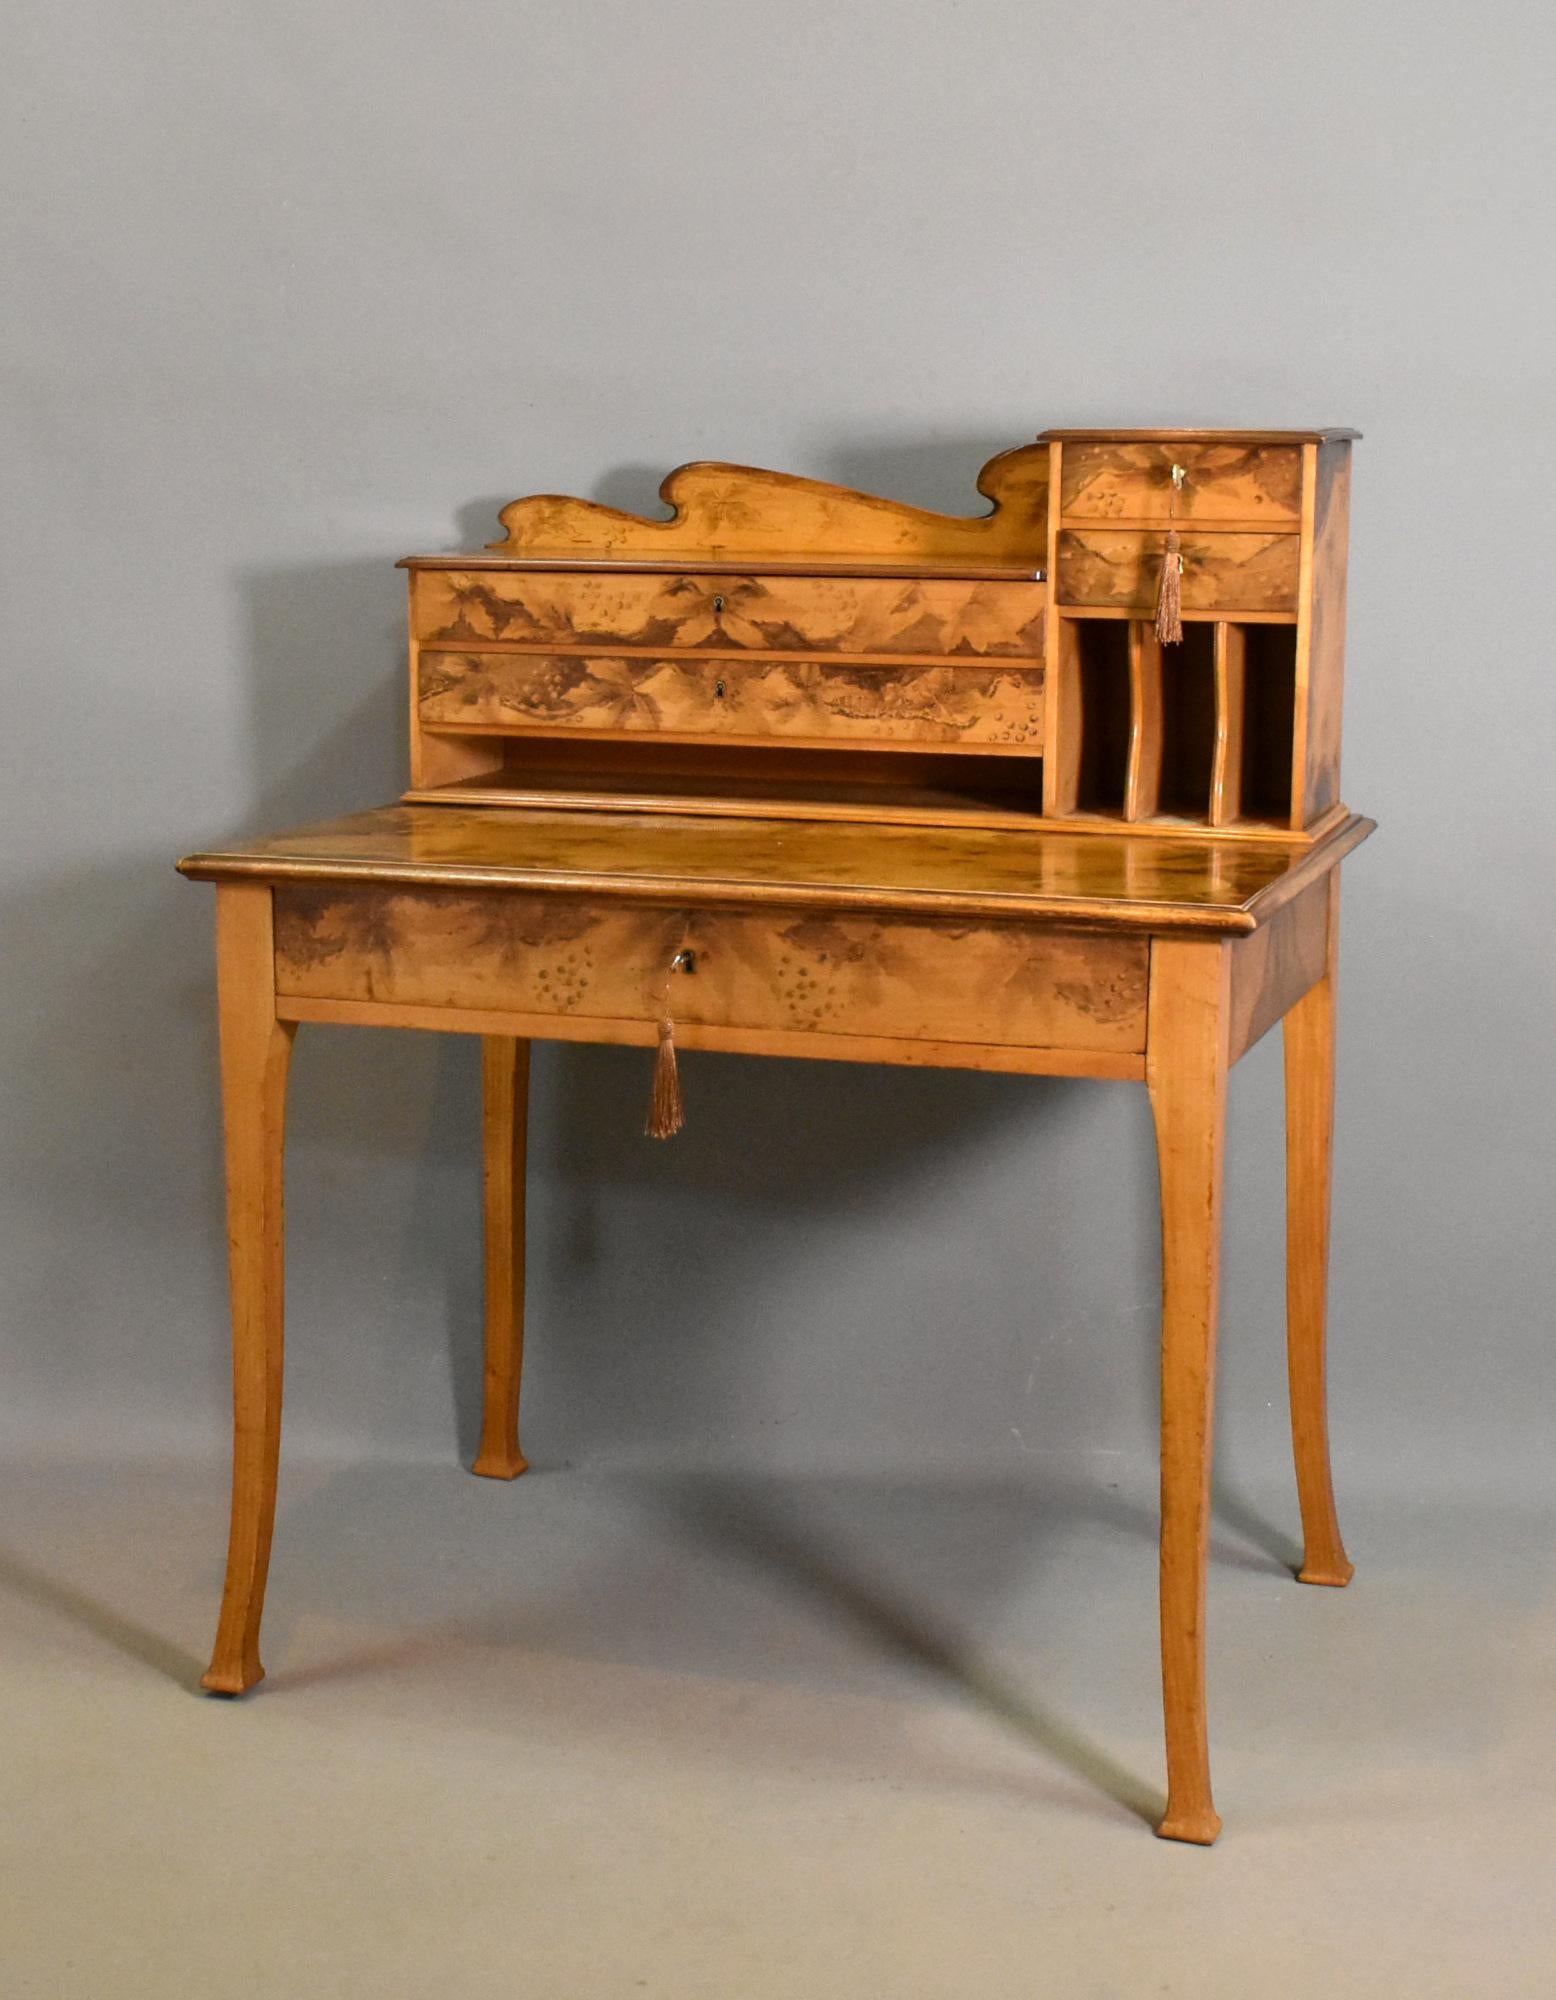 Hand-Crafted Art Nouveau Tiered Pyrography Etched Desk